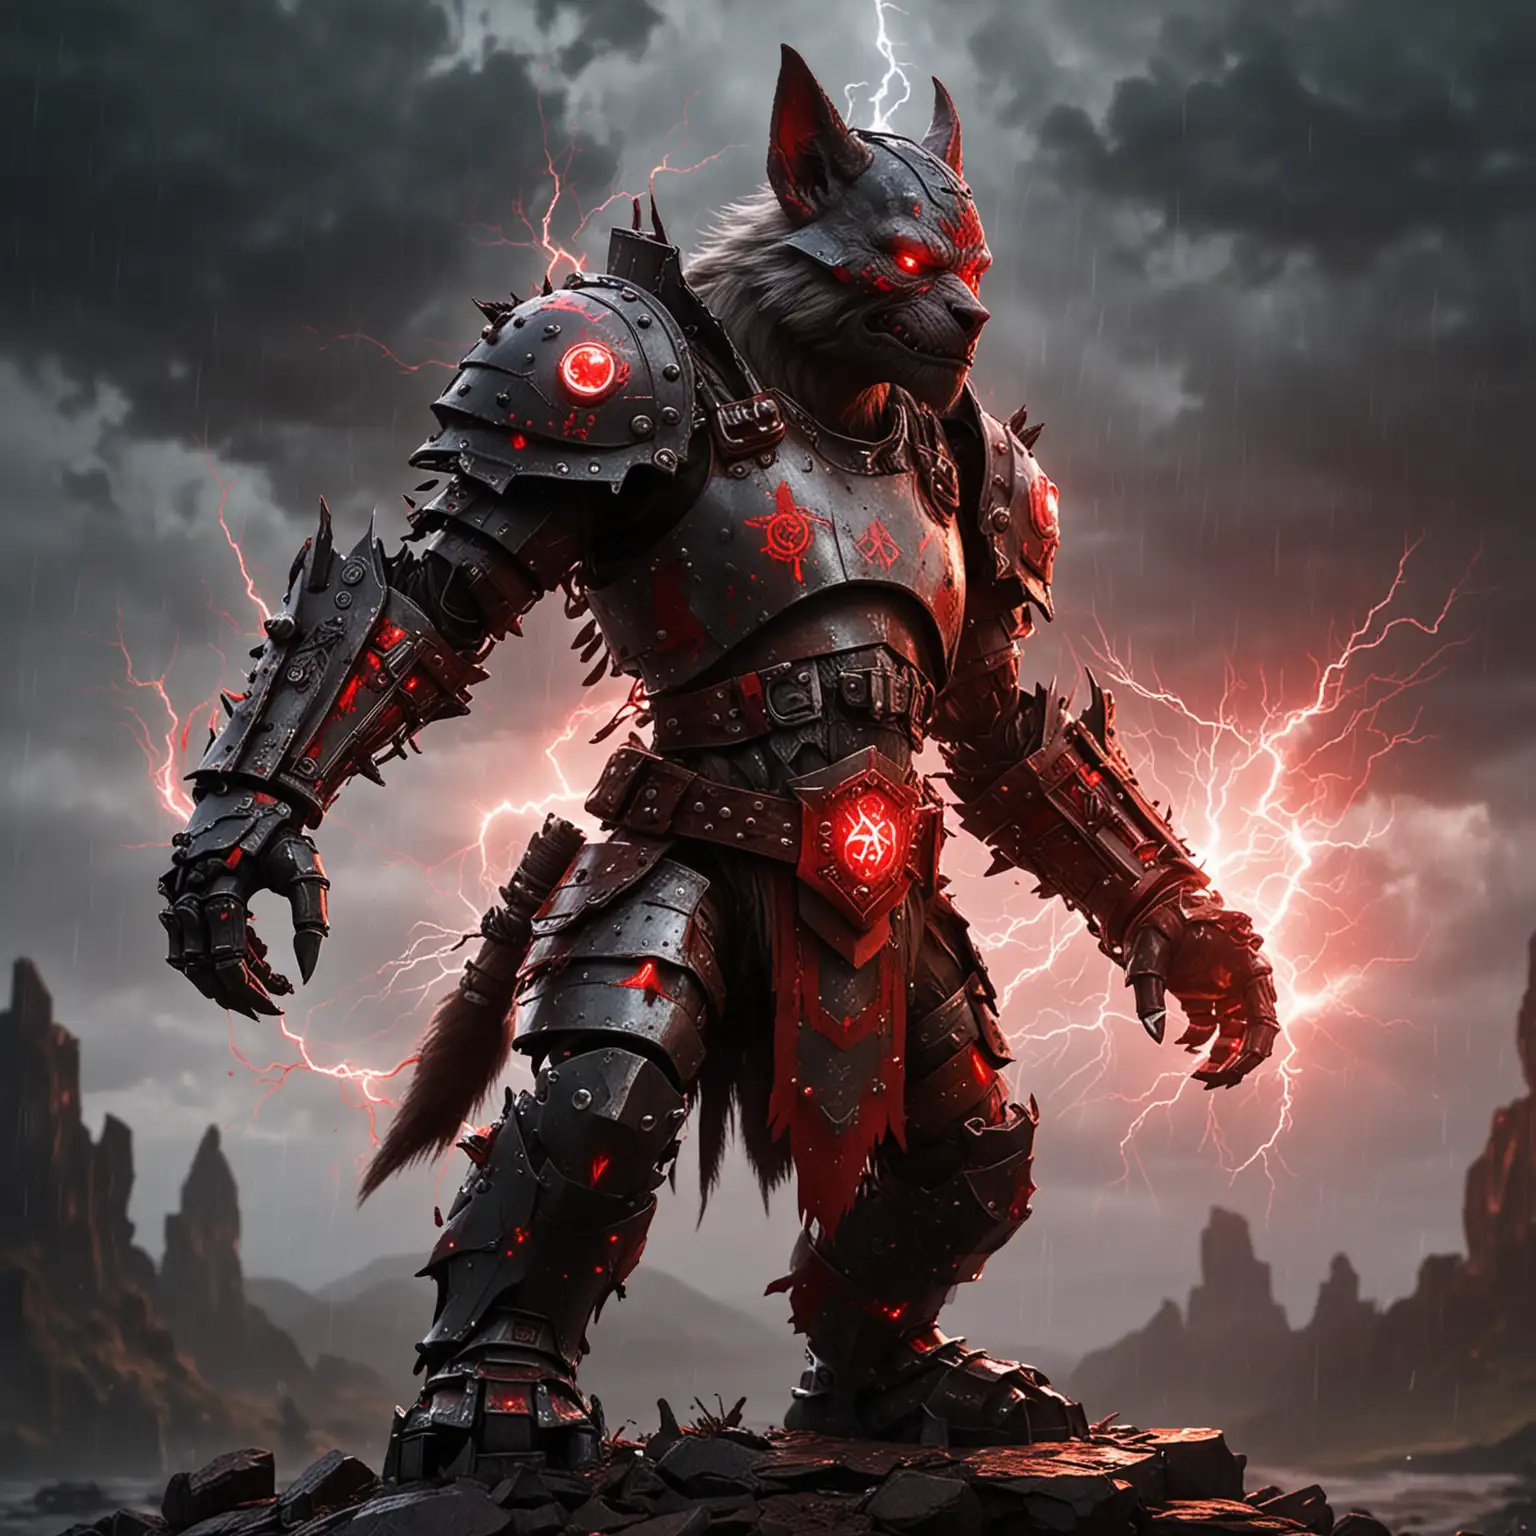 a robot werewolf-gnome cyborg wearing ancient plate armor painted with glowing red runes, powered and fueled by blood magic, with lightning bolt energy surrounding the gauntlets, silhouetted by the morning dawn on a stormy day